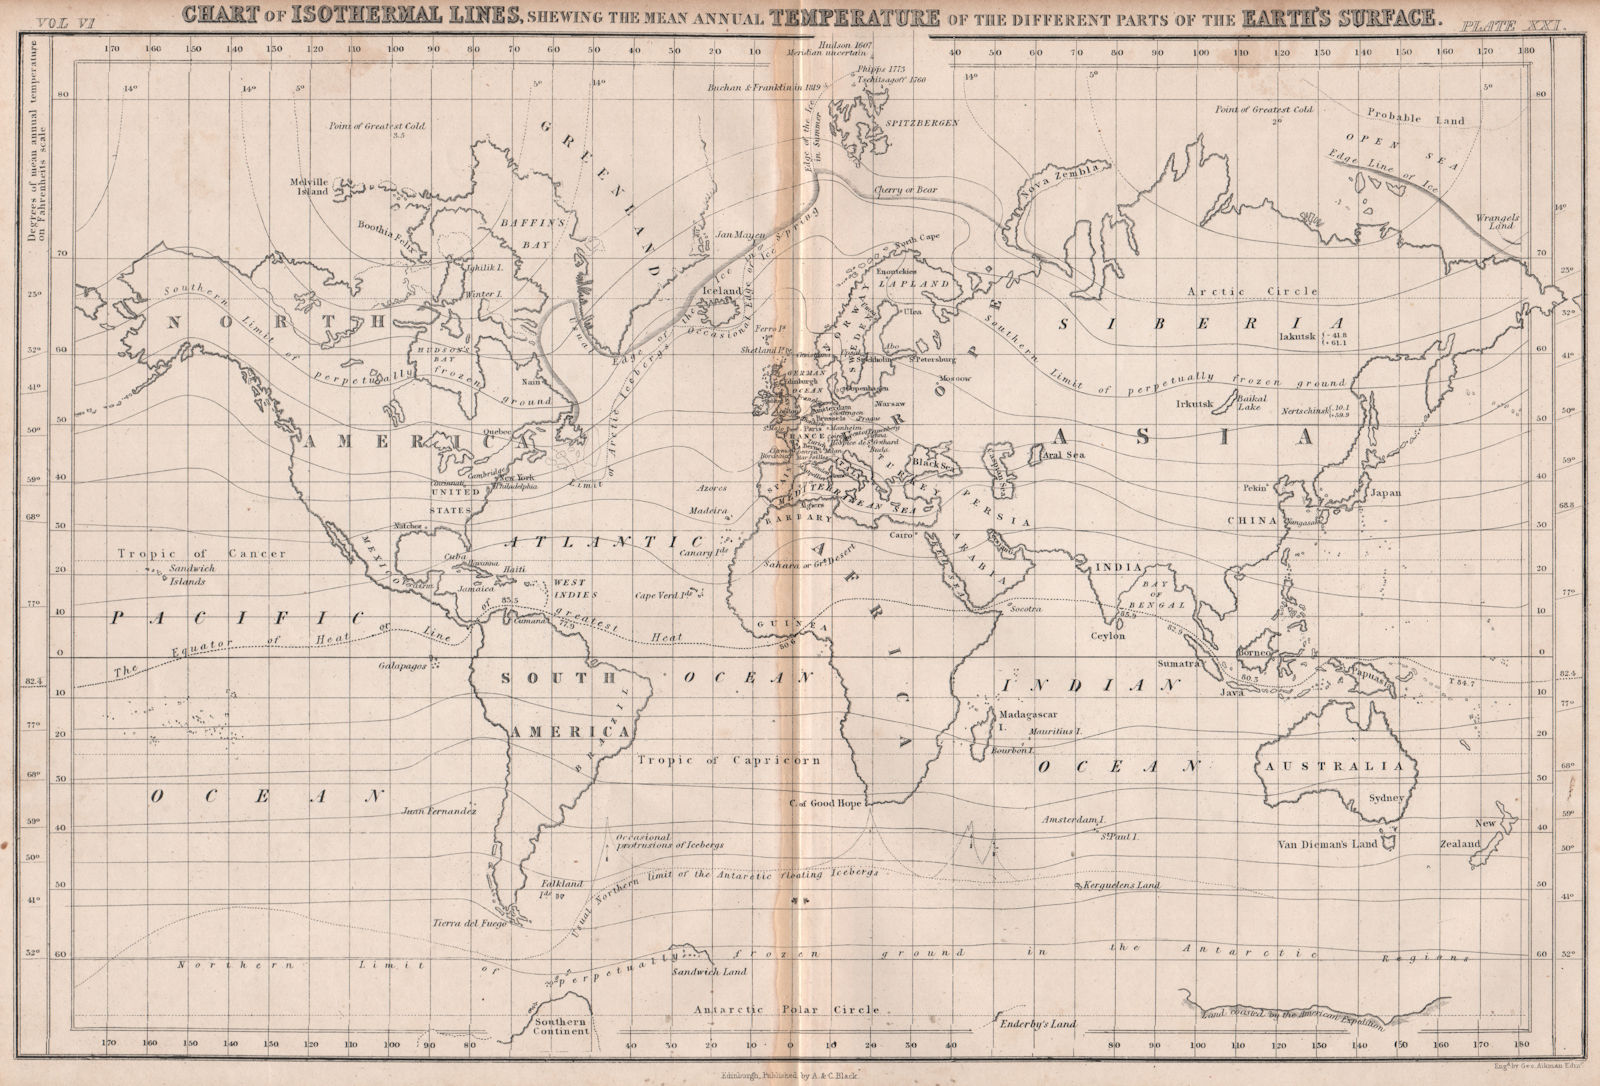 WORLD. Isothermal lines of equal mean annual temperature. BRITANNICA 1860 map